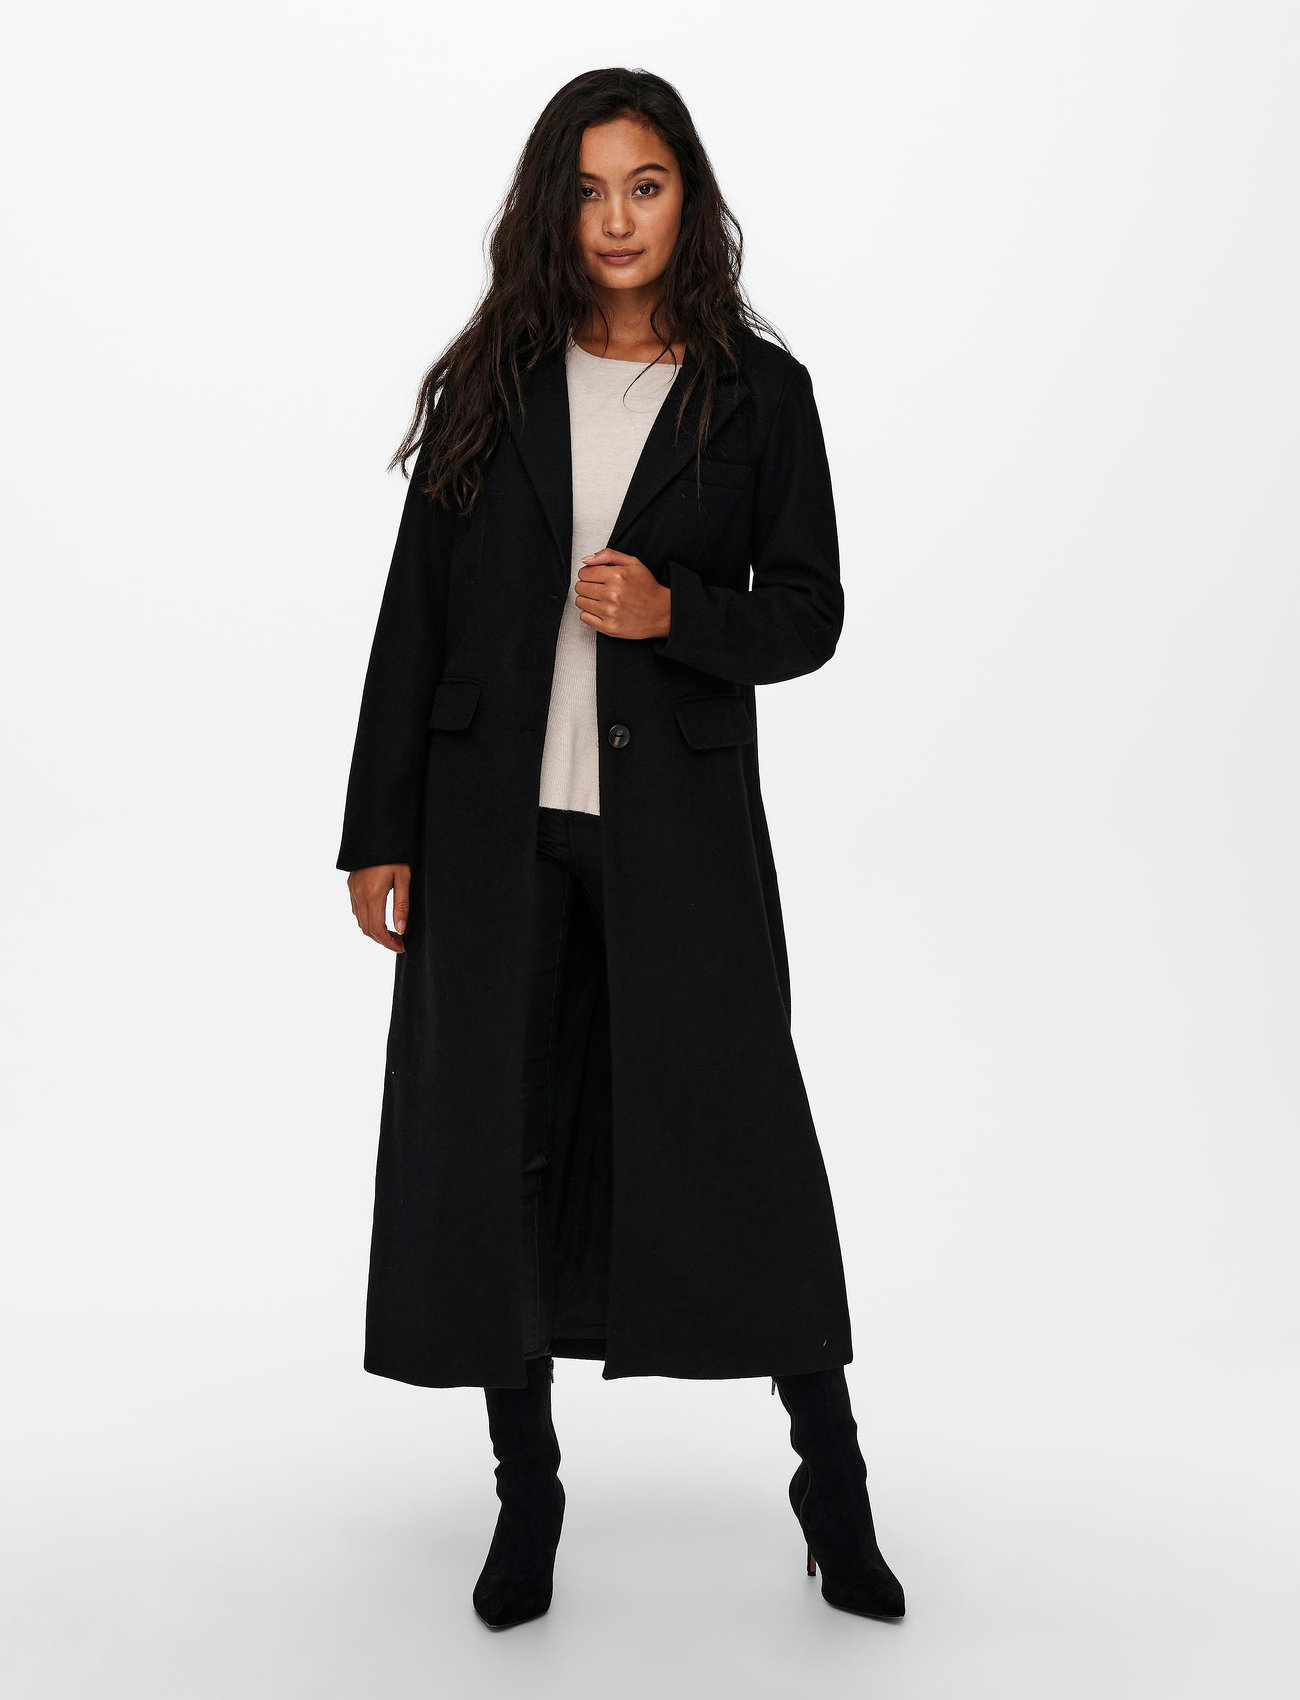 ONLY Onlemma X-long Coat Cc Otw - 69.99 €. Buy Winter Coats from ONLY  online at Boozt.com. Fast delivery and easy returns